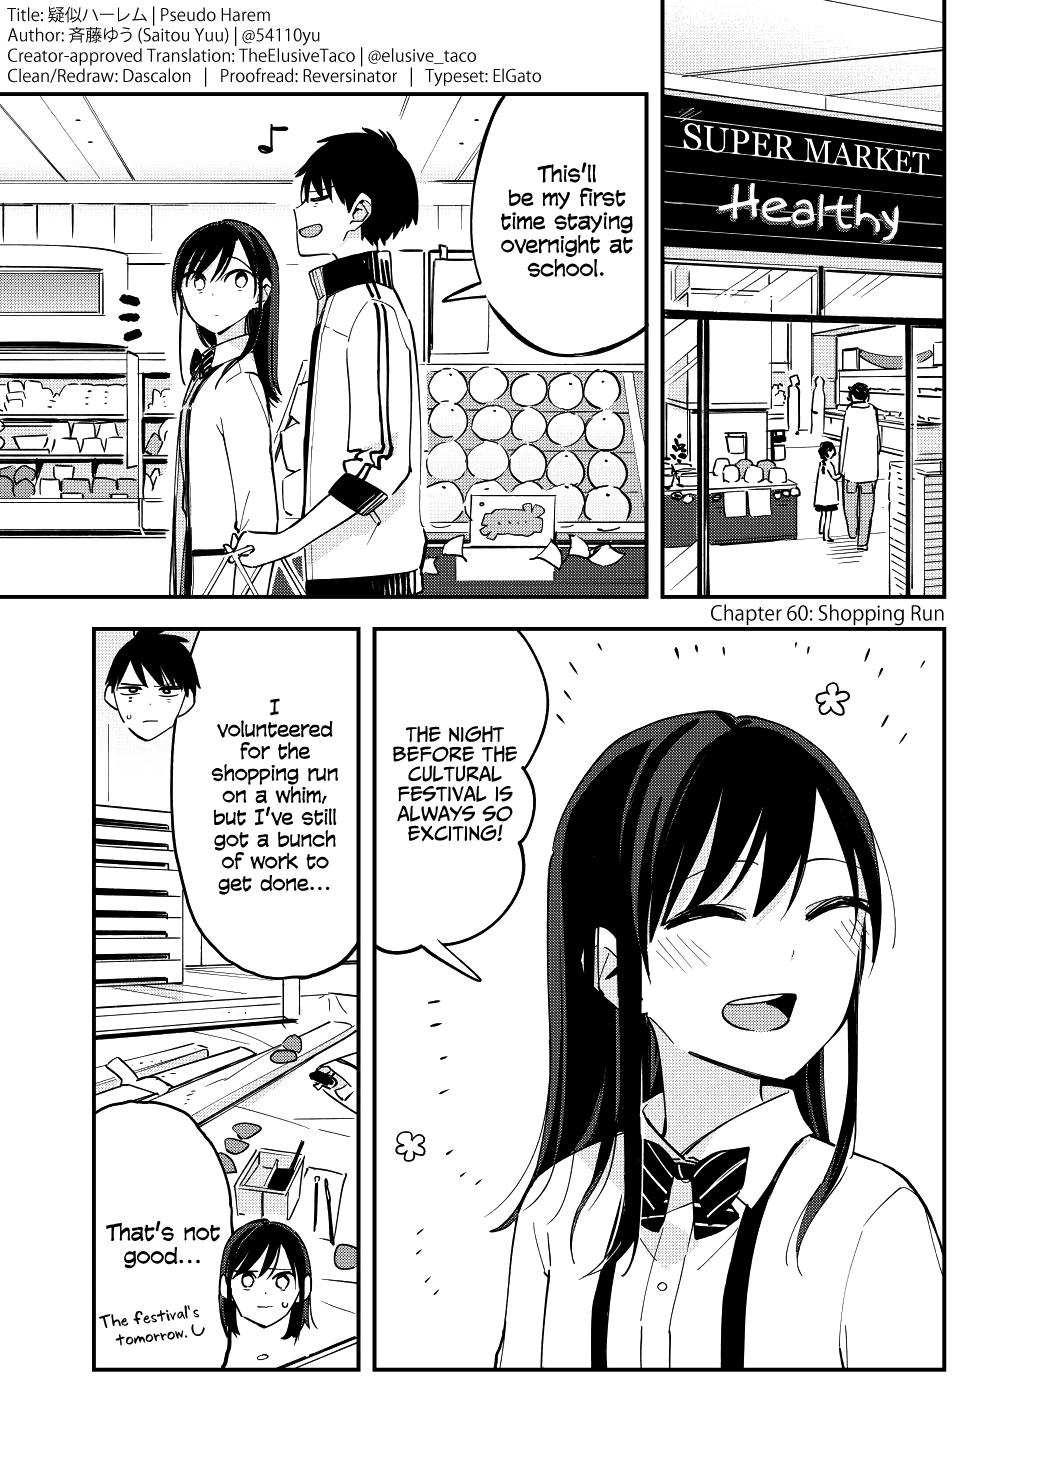 Pseudo Harem Vol.3 Chapter 60: Shopping Run - Picture 1